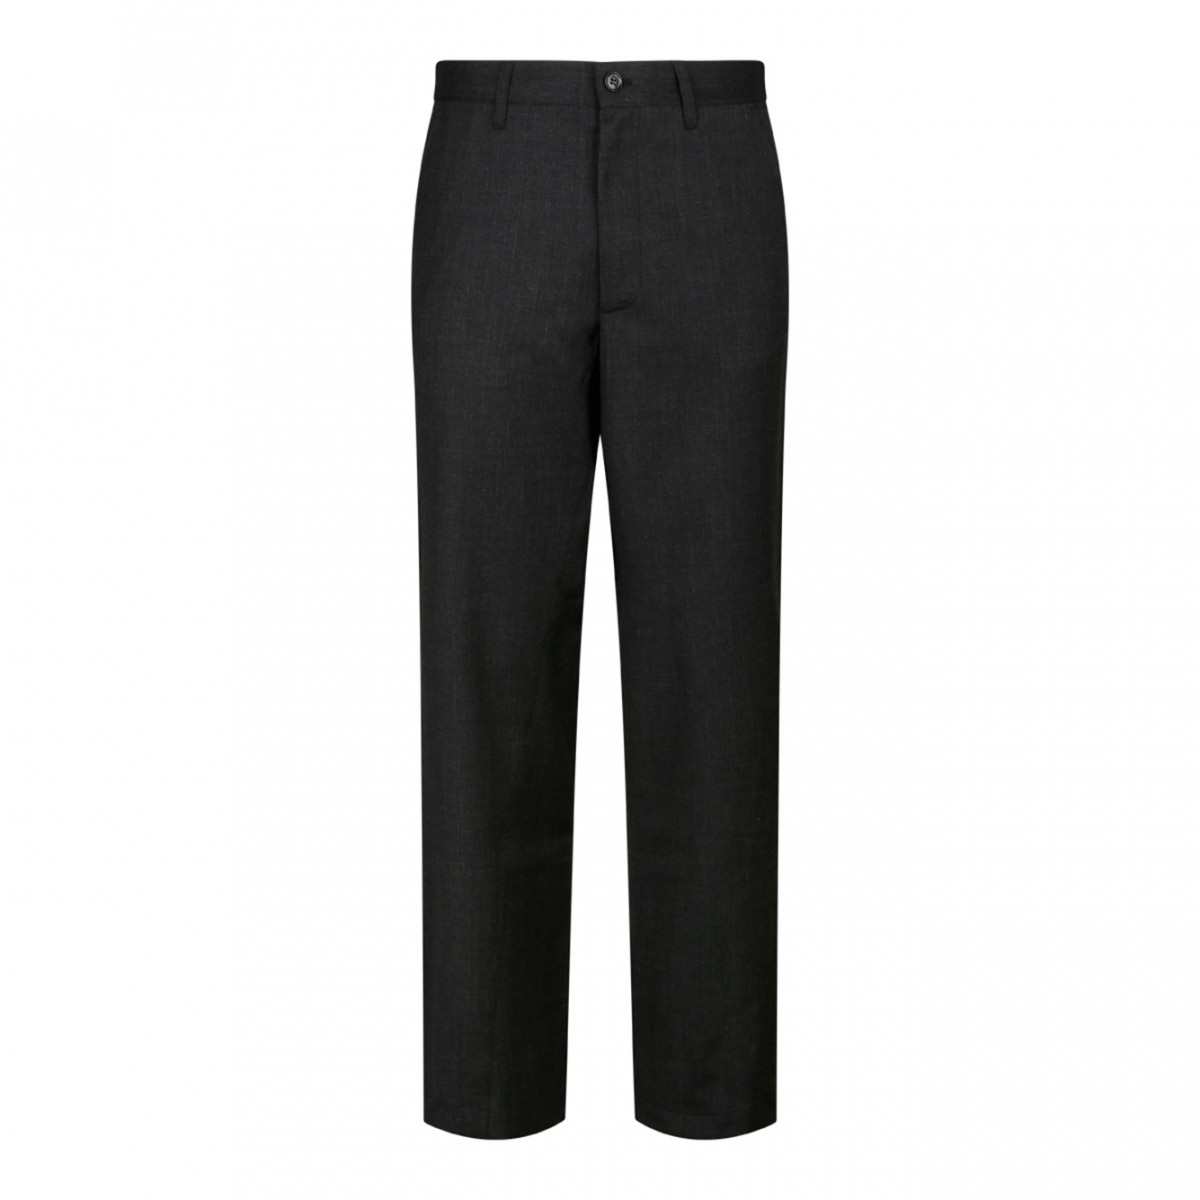 Anthracite Grey Straight Leg Trousers